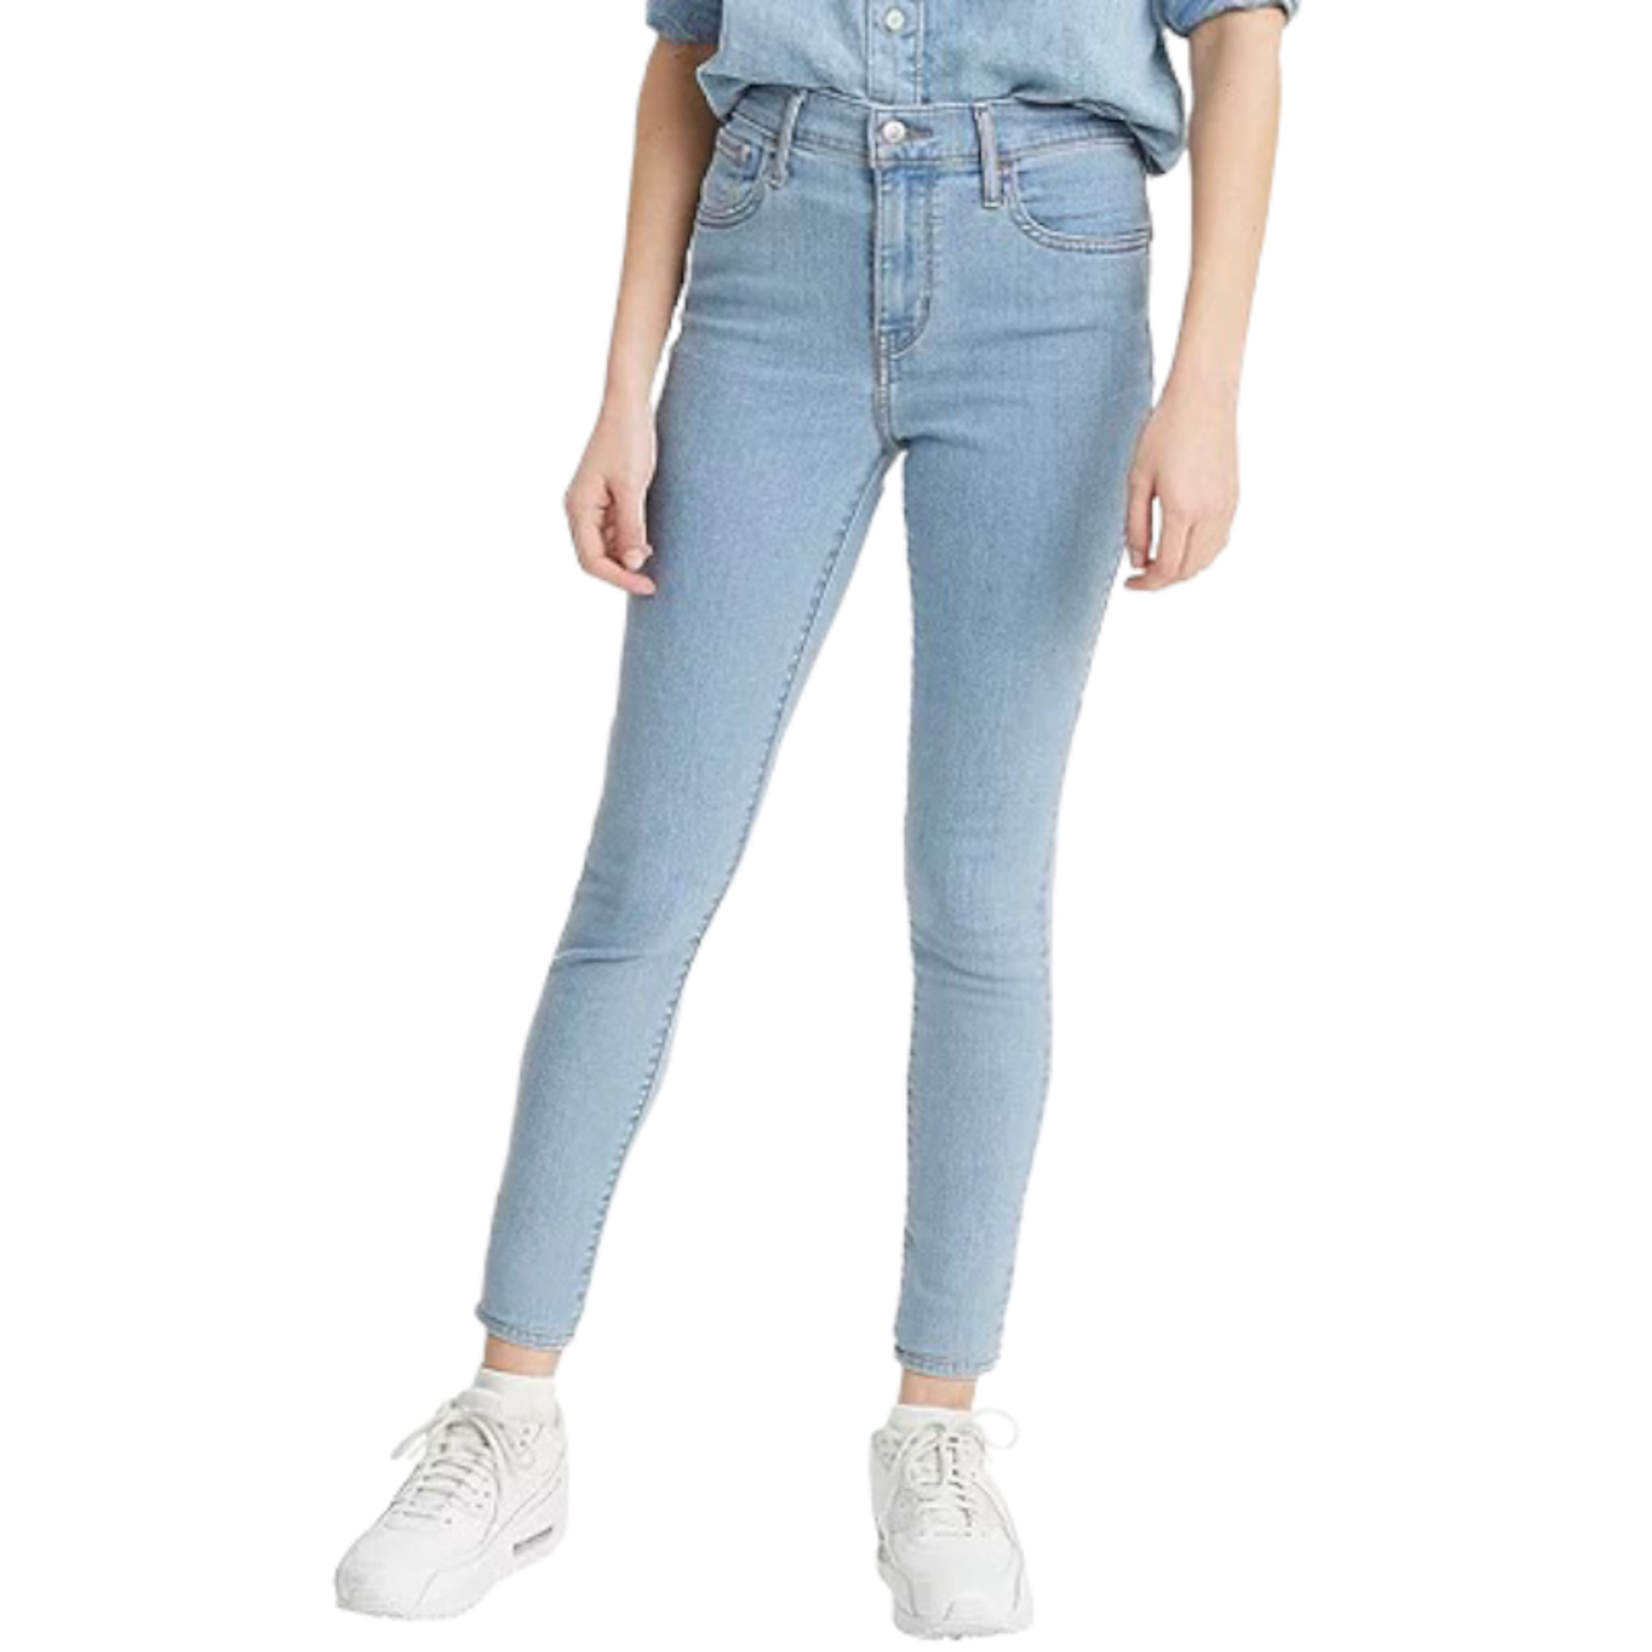 LEVIS 720 HIGH RISE SUPER SKINNY 52797-0196 - Michael's and Jody's